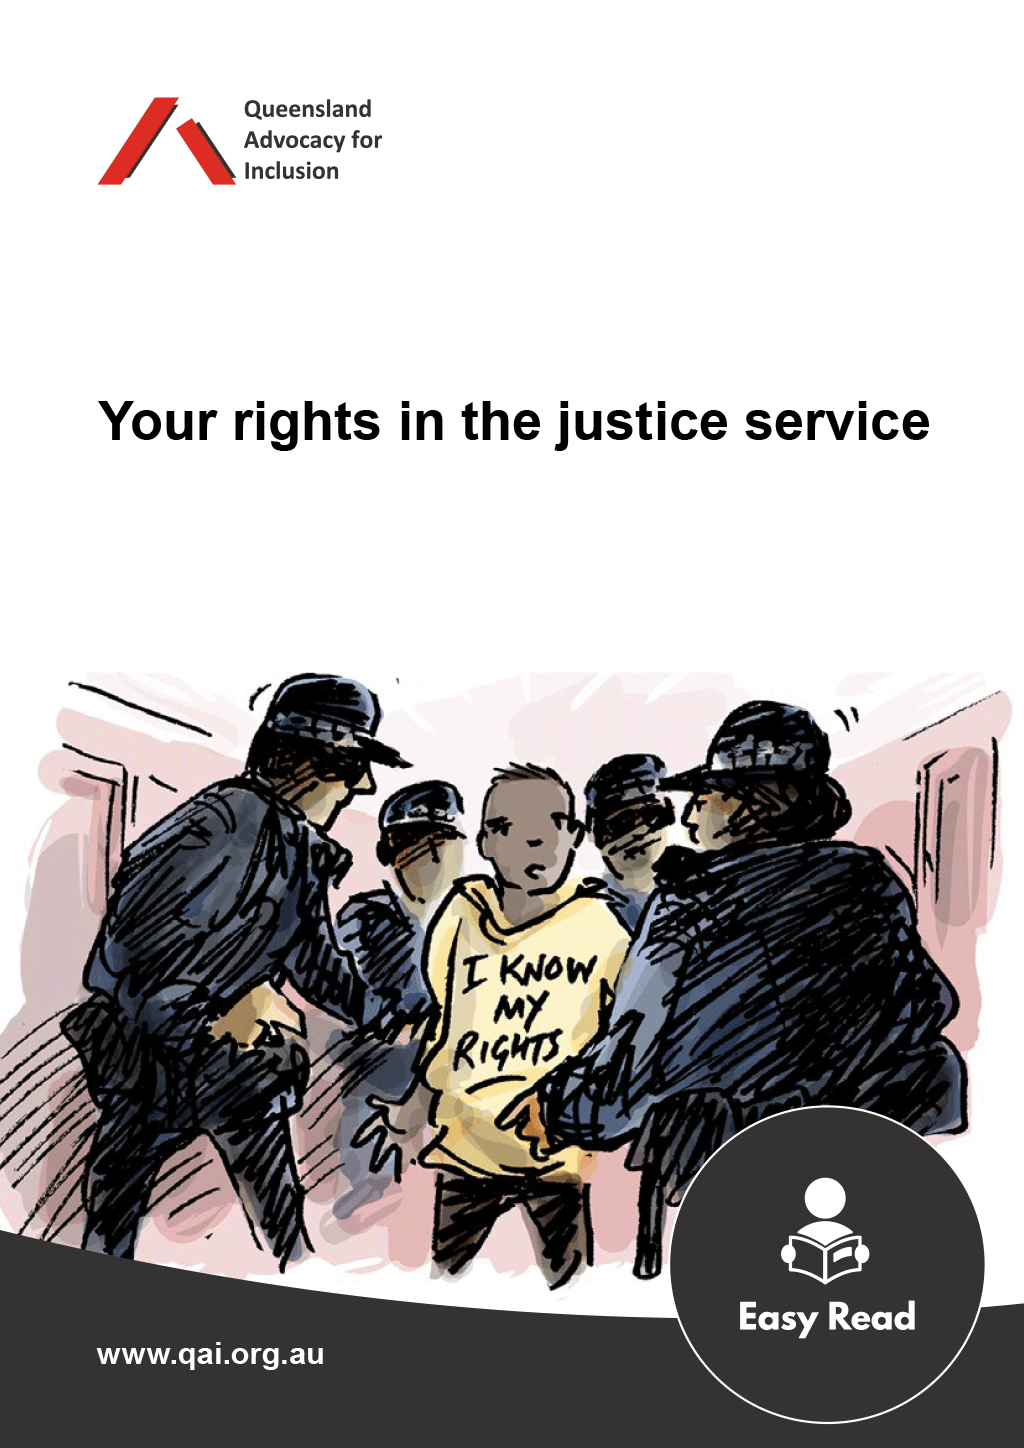 Checklist cover page with QAI logo, title "Your rights in the justice service" with an illustration of a man wearing a hoodie that says "I know my rights" surrounded by 4 police officers. Easy Read icon in the bottom corner.